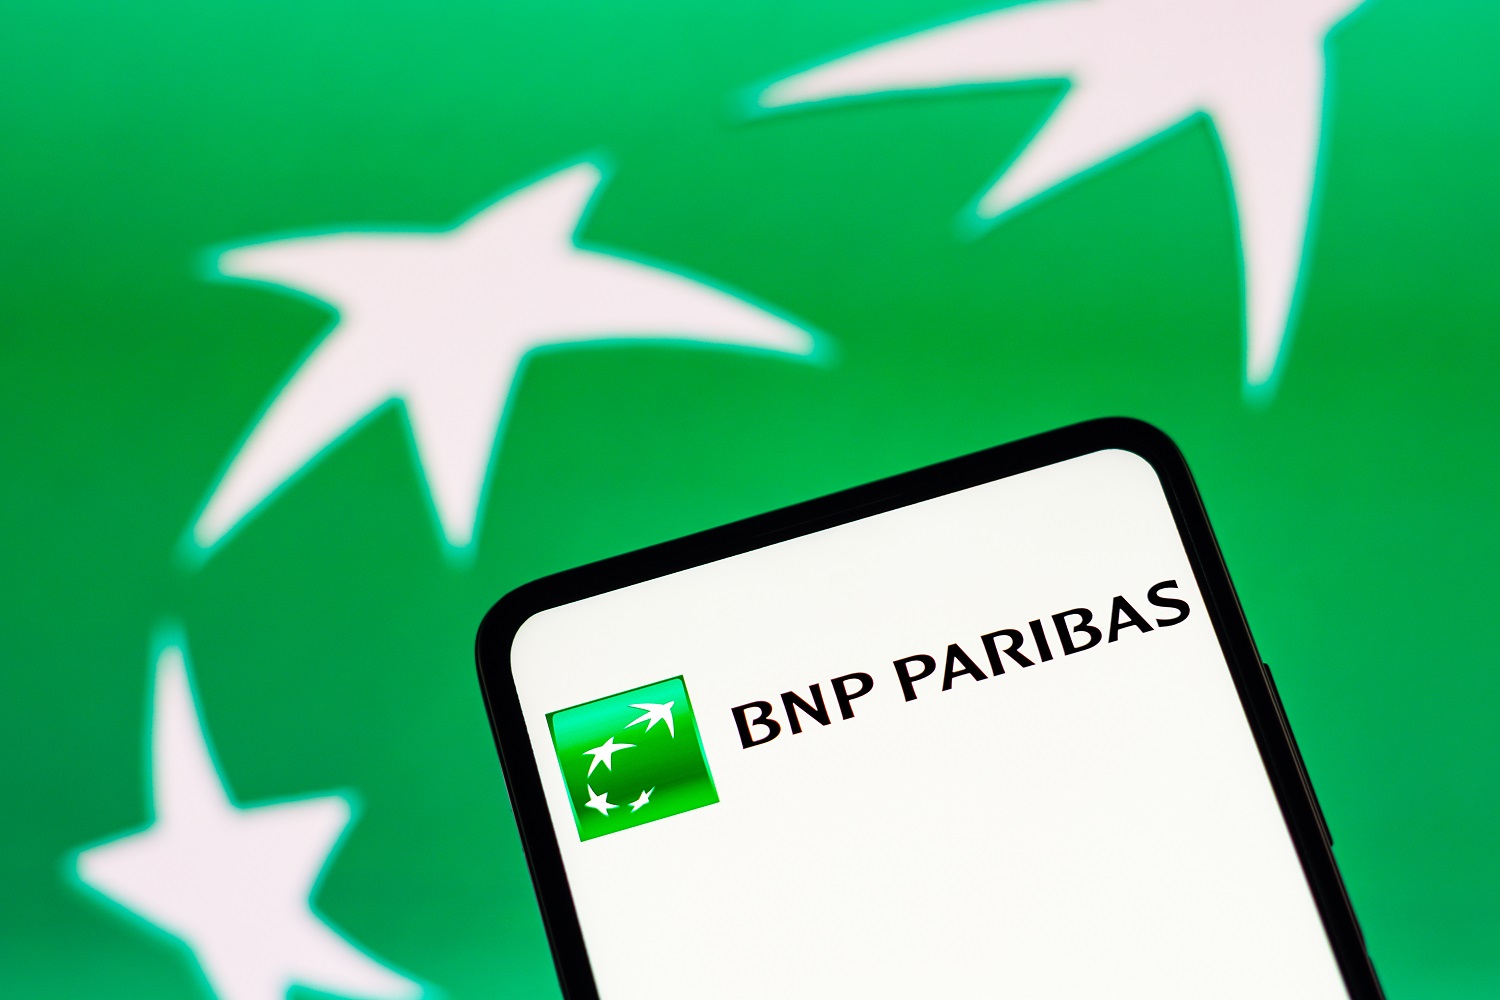 The BNP Paribas logo on a smartphone screen against the backdrop of a larger, green BNP Paribas logo background.